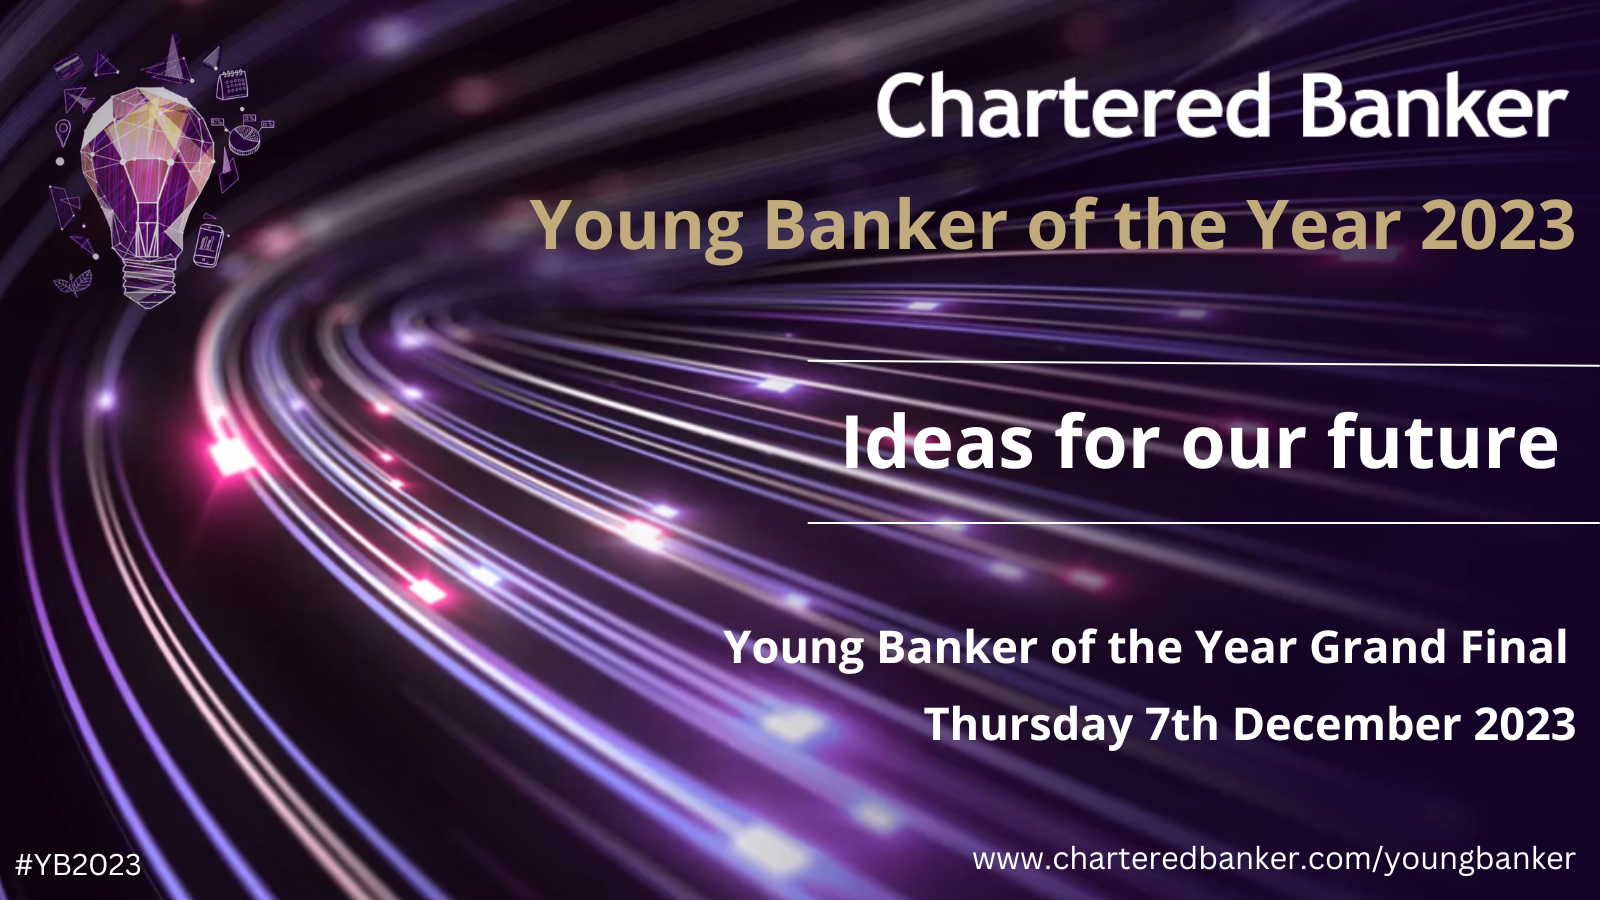 Young Banker of the Year 2023 - Grand Final Highlights